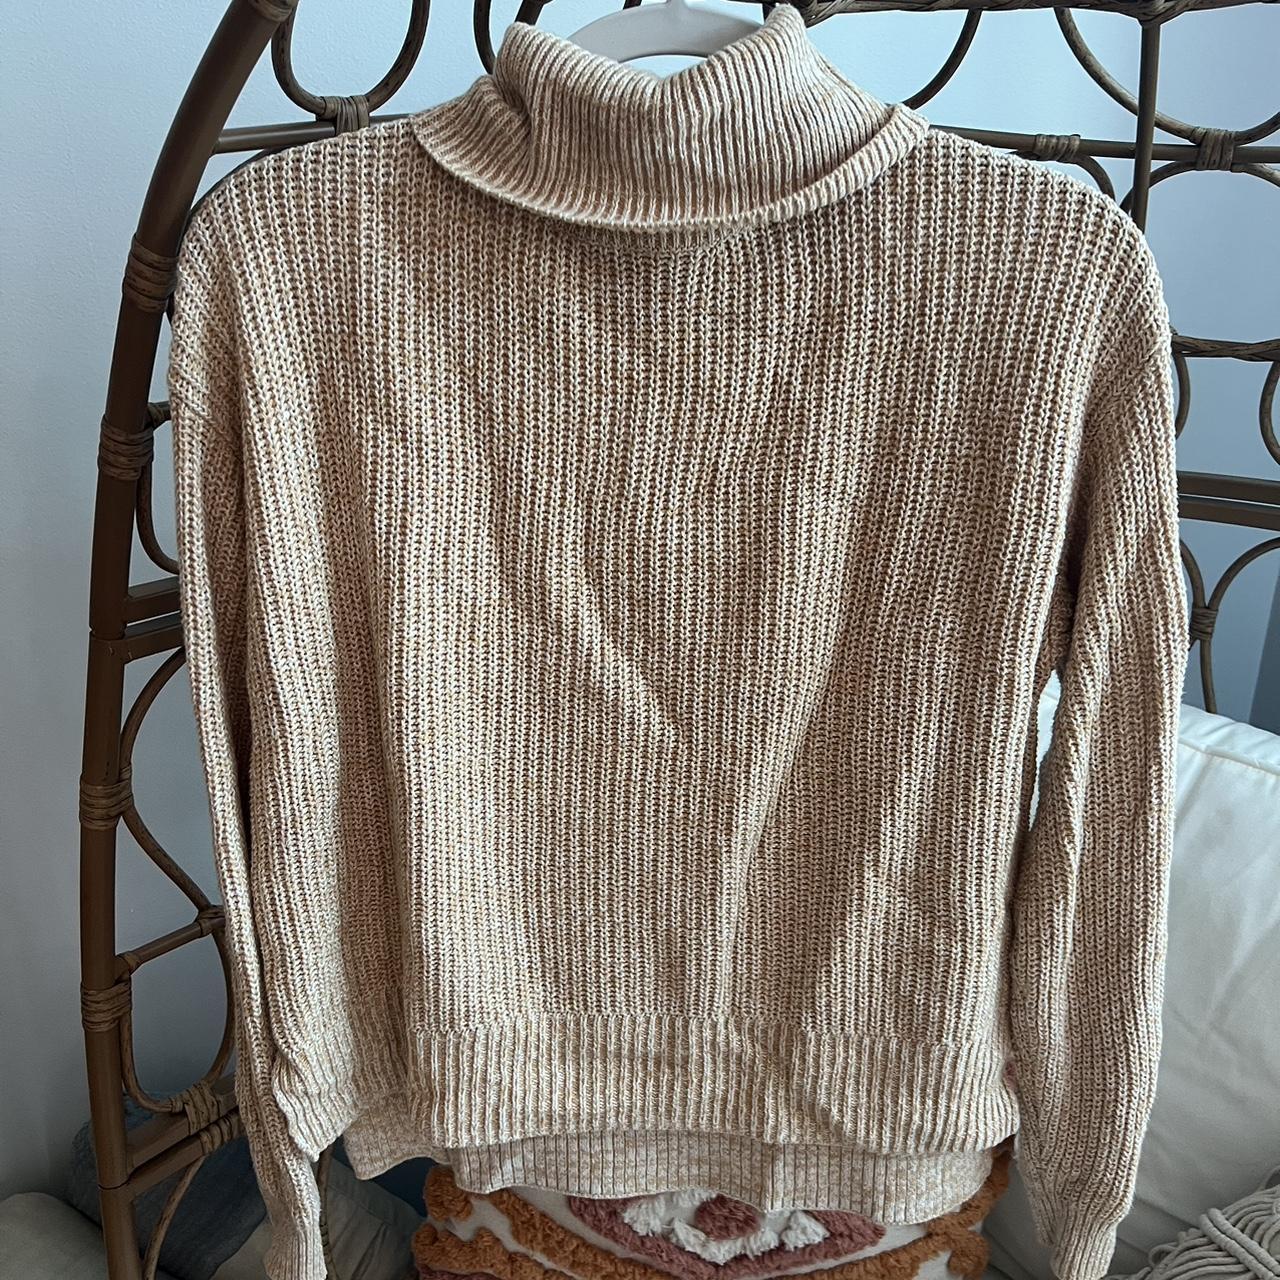 Urban outfitters yellow turtle neck sweater size S!... - Depop